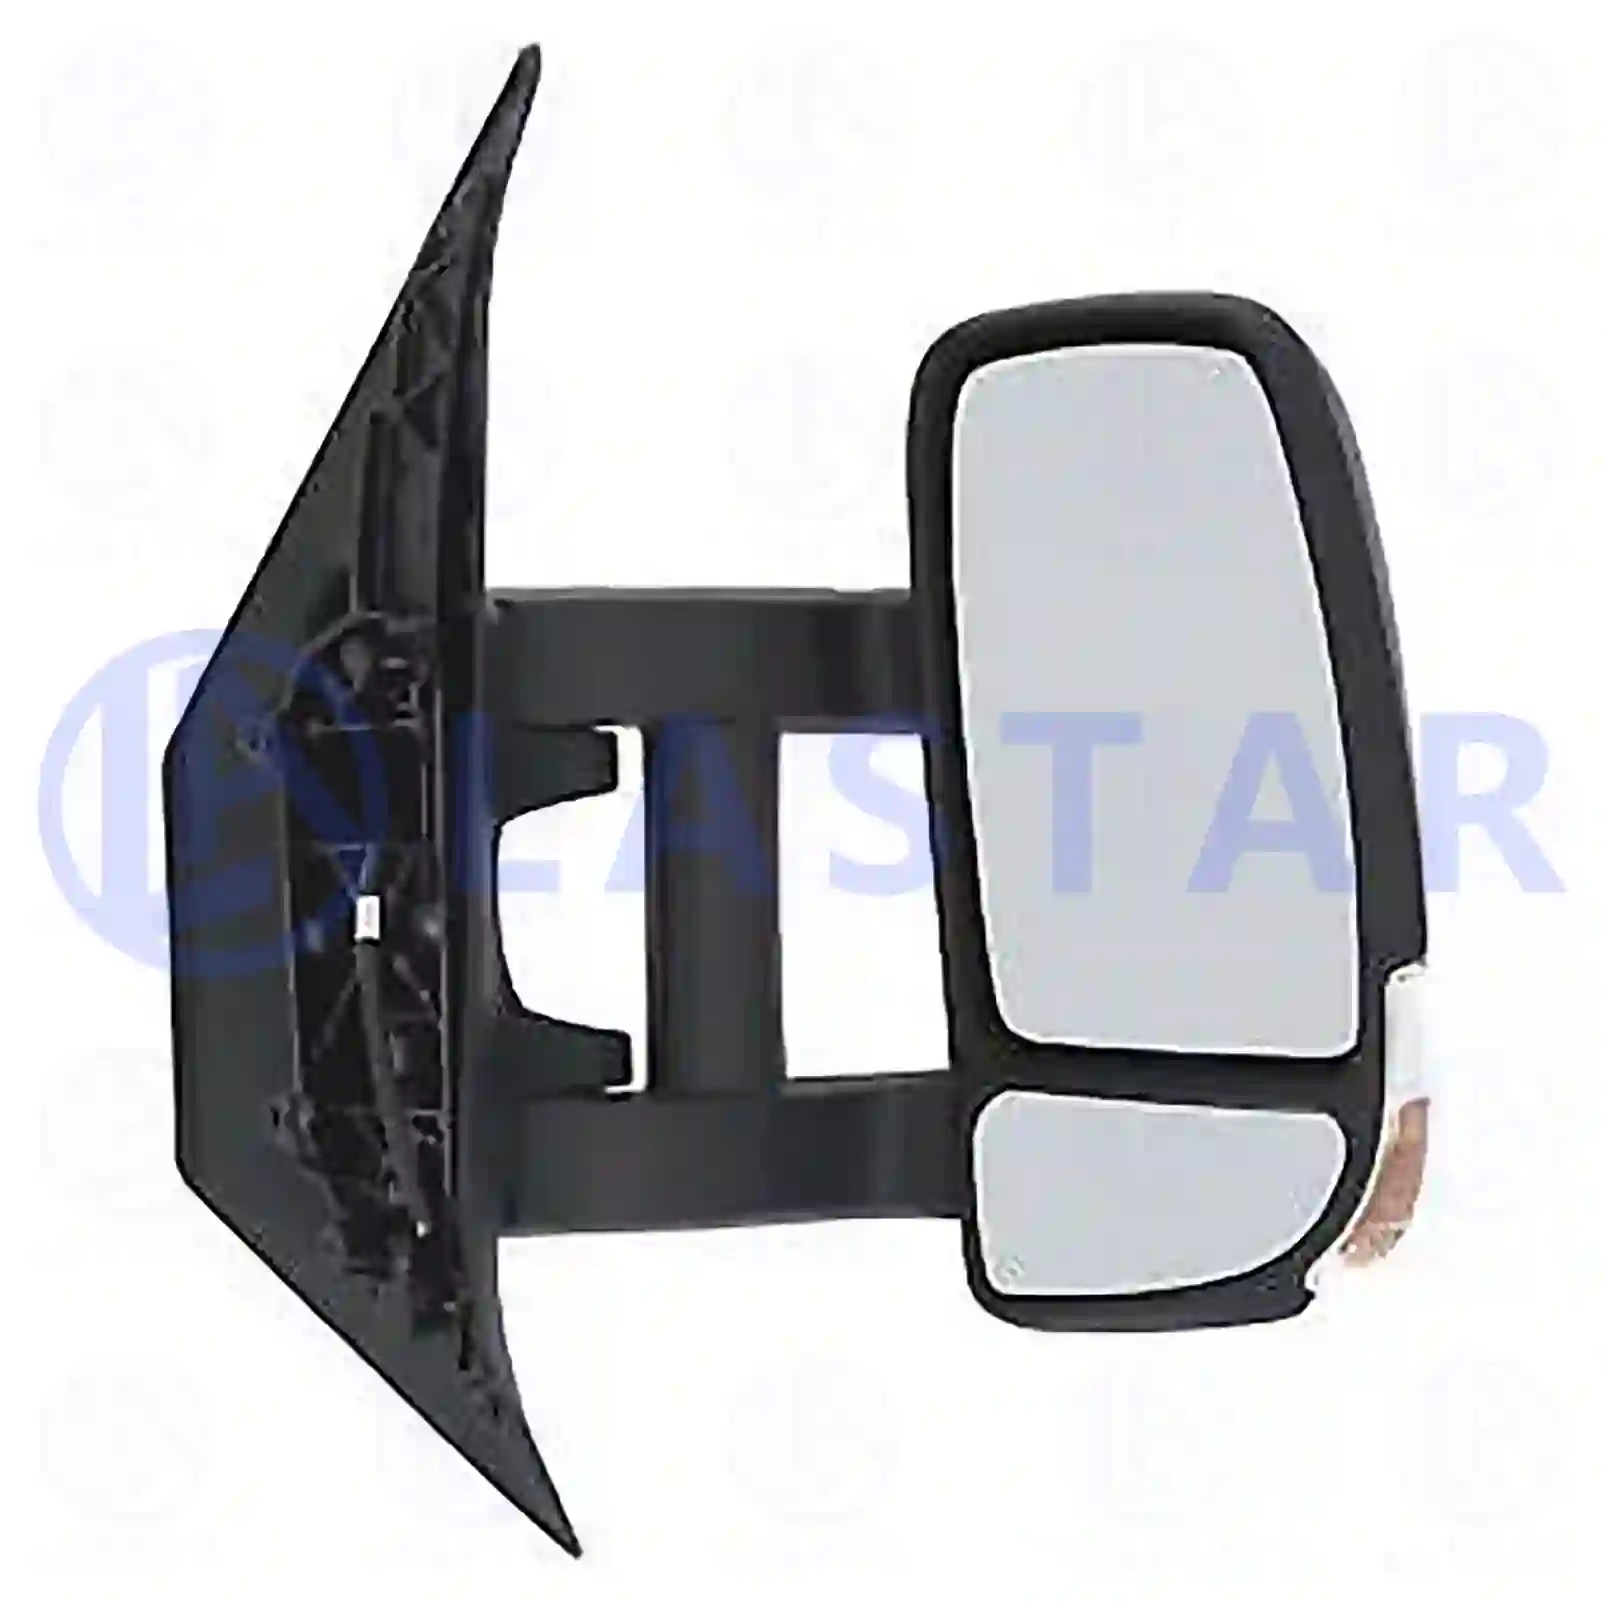 Main mirror, complete, right, 77720451, 93197492, 4419414, 963010148R, 963018382R ||  77720451 Lastar Spare Part | Truck Spare Parts, Auotomotive Spare Parts Main mirror, complete, right, 77720451, 93197492, 4419414, 963010148R, 963018382R ||  77720451 Lastar Spare Part | Truck Spare Parts, Auotomotive Spare Parts